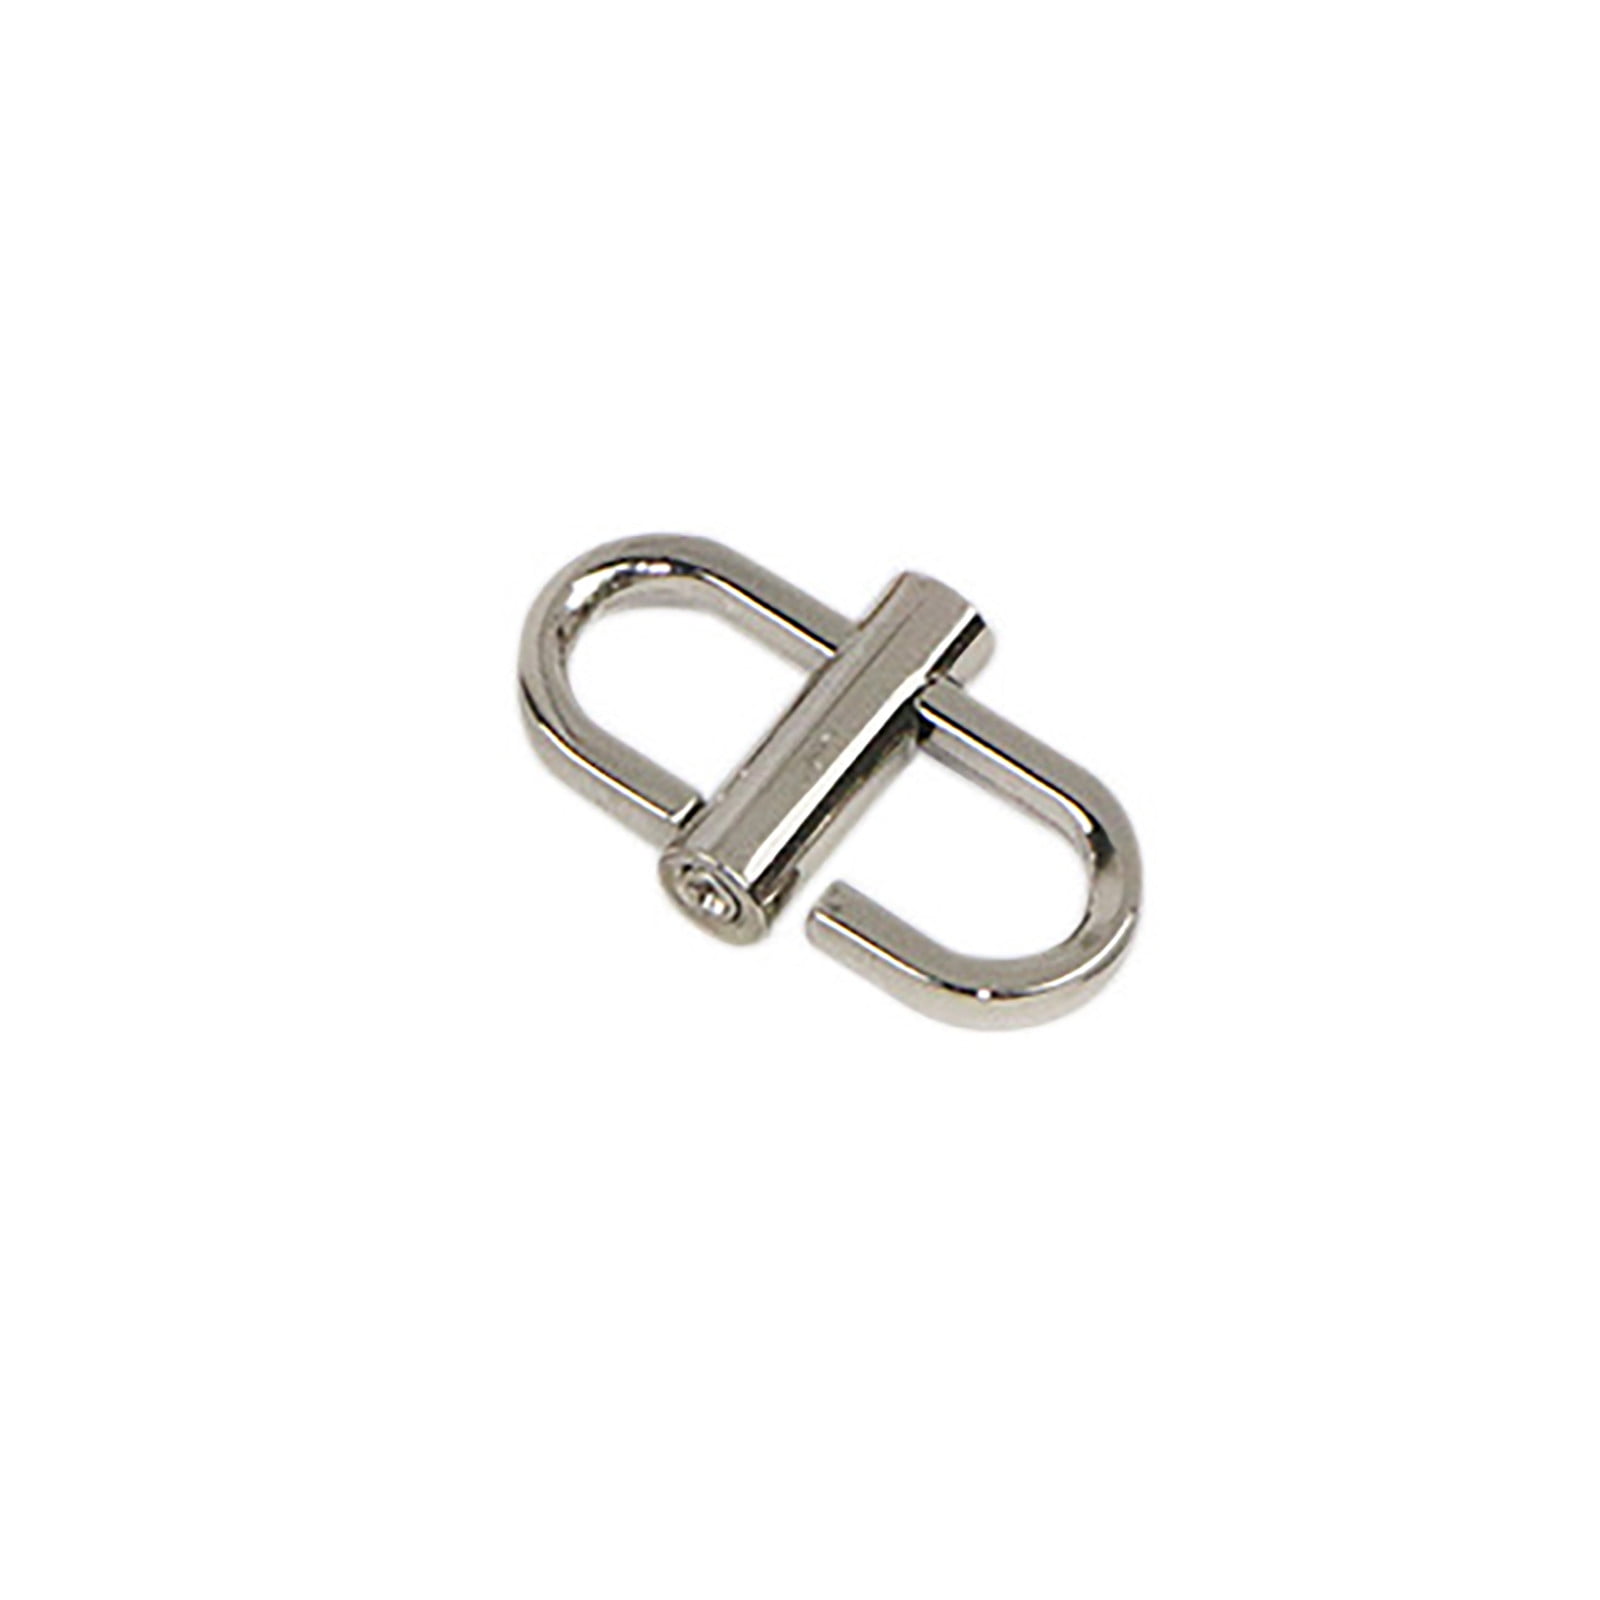 Chain Adjustment Buckle Chain Buckle Metal Locking Length Shortening Buckle  - China Chain Adjustment Clasp and Chain Adjusters price